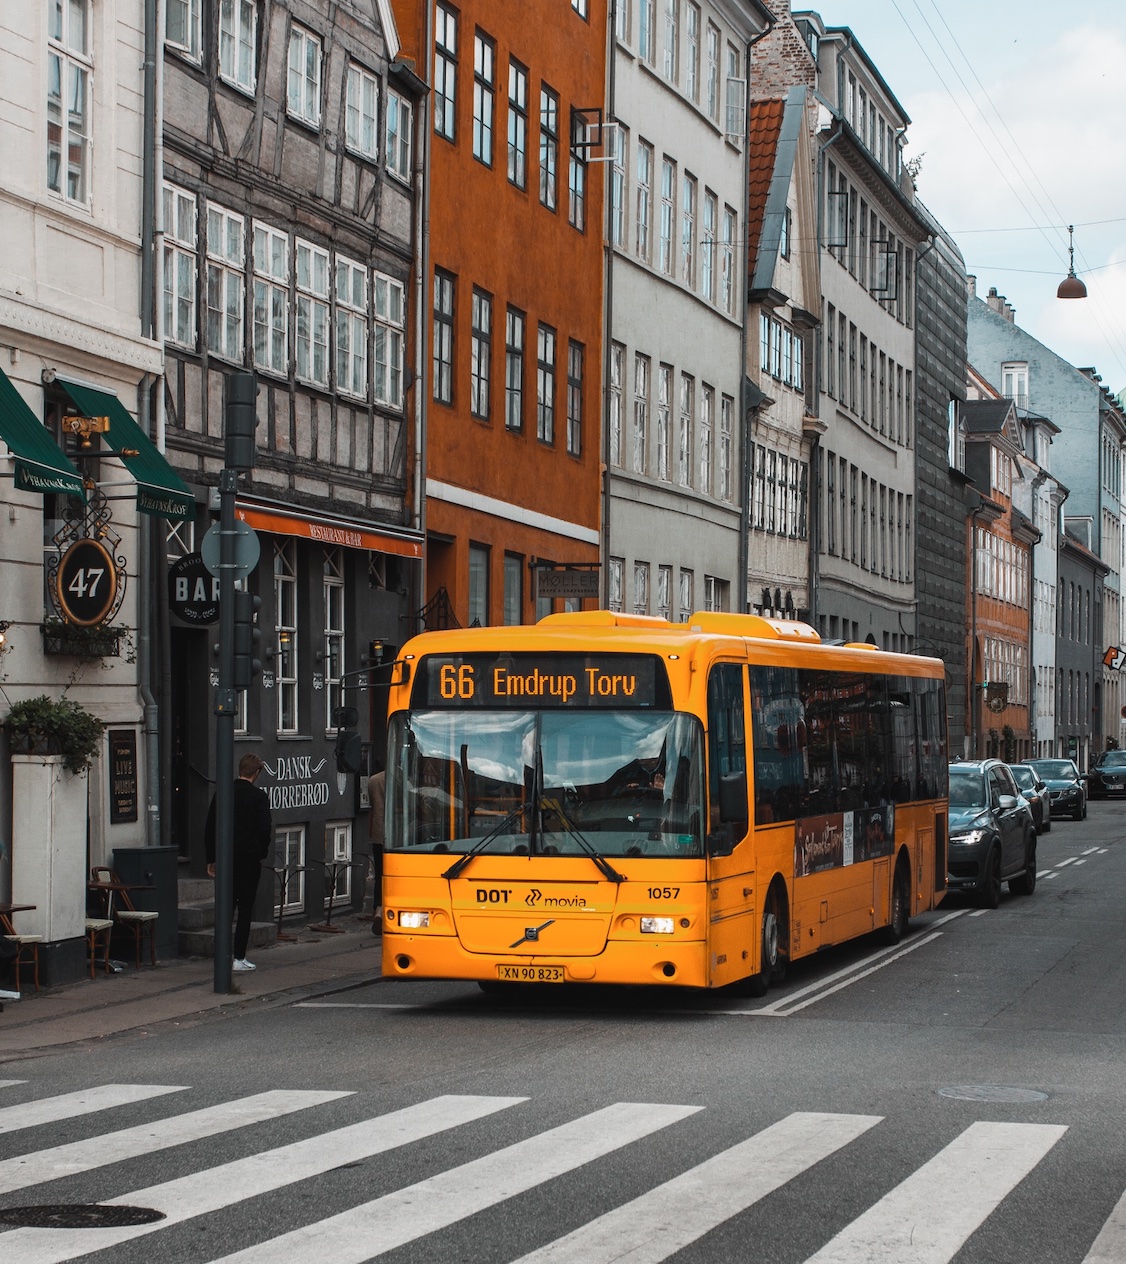 Yellow bus stopped in traffic; image by Teddy O, via Unsplash.com.